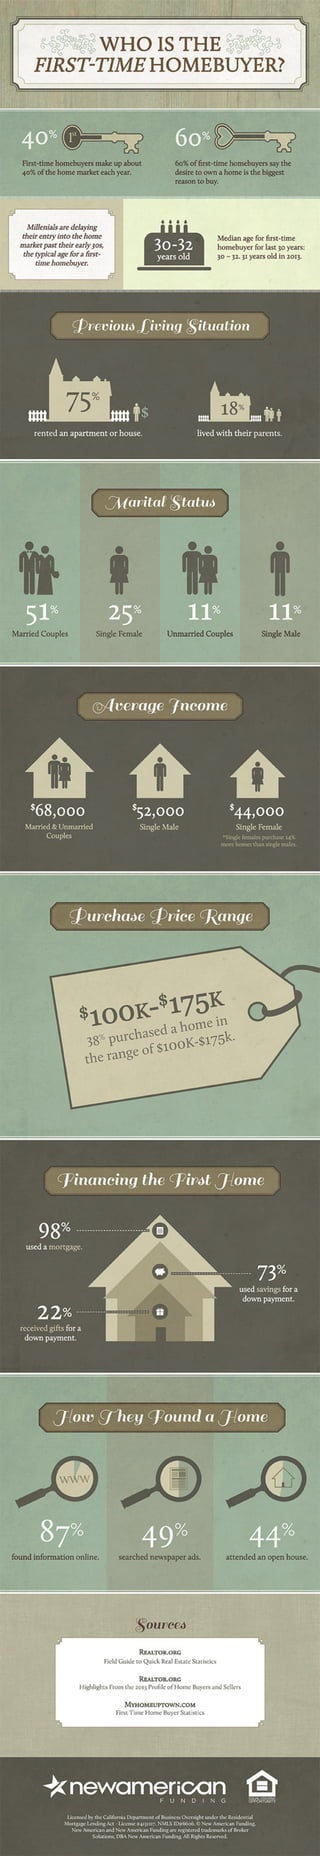 Who Is the First Time Homebuyer - Infographic | New American Funding